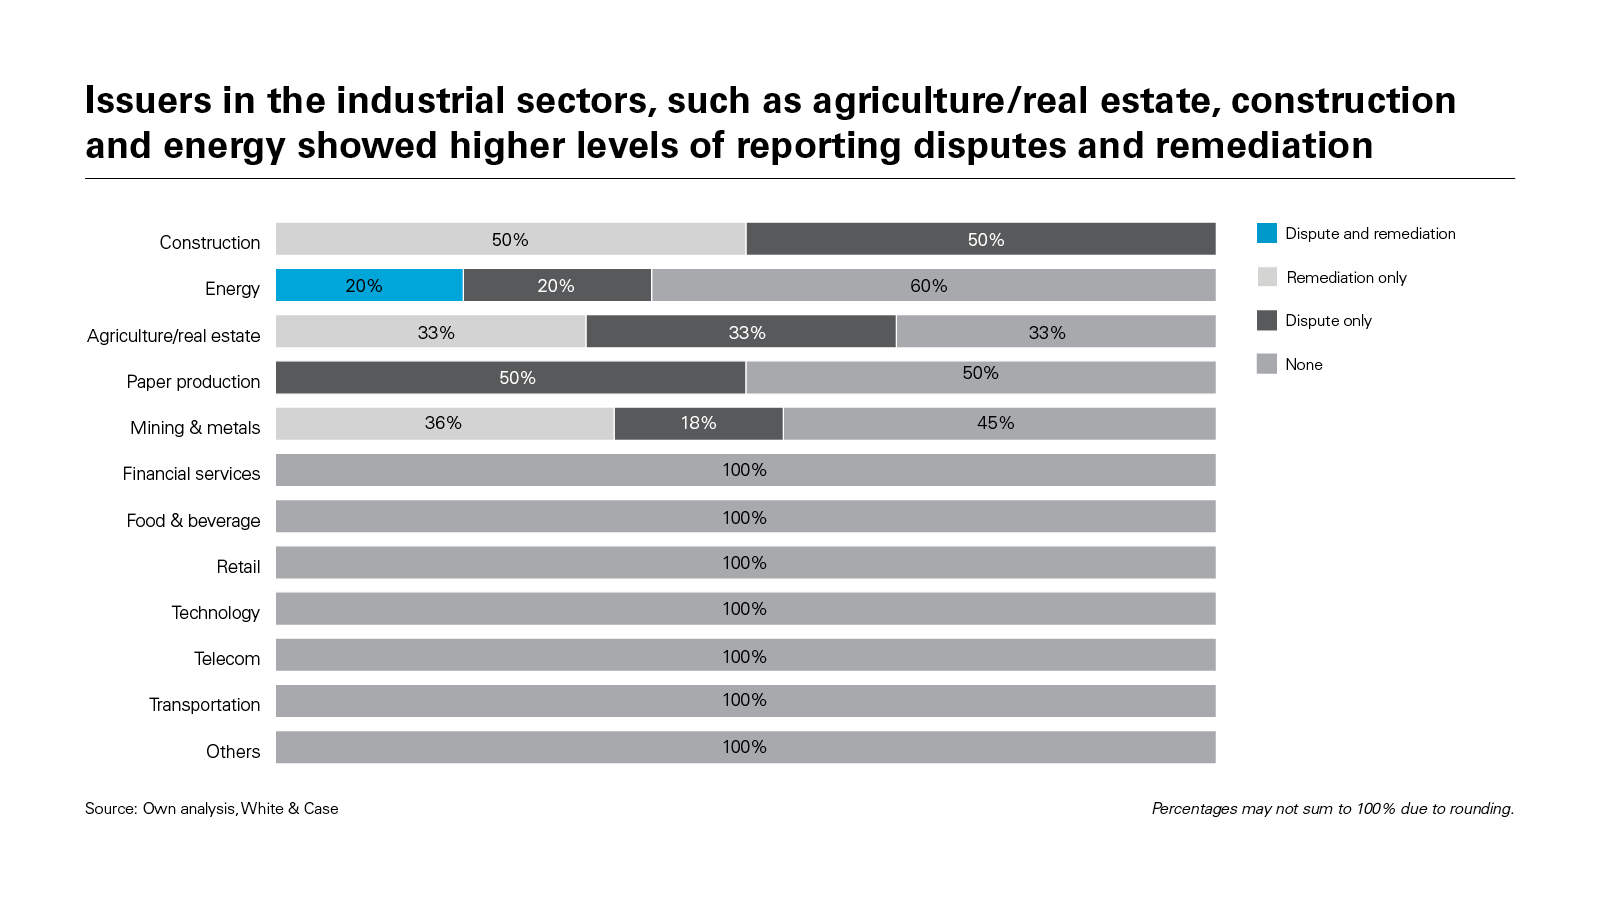 Issuers in the industrial sectors, such as agriculture/real estate, construction and energy showed higher levels of reporting disputes and remediation